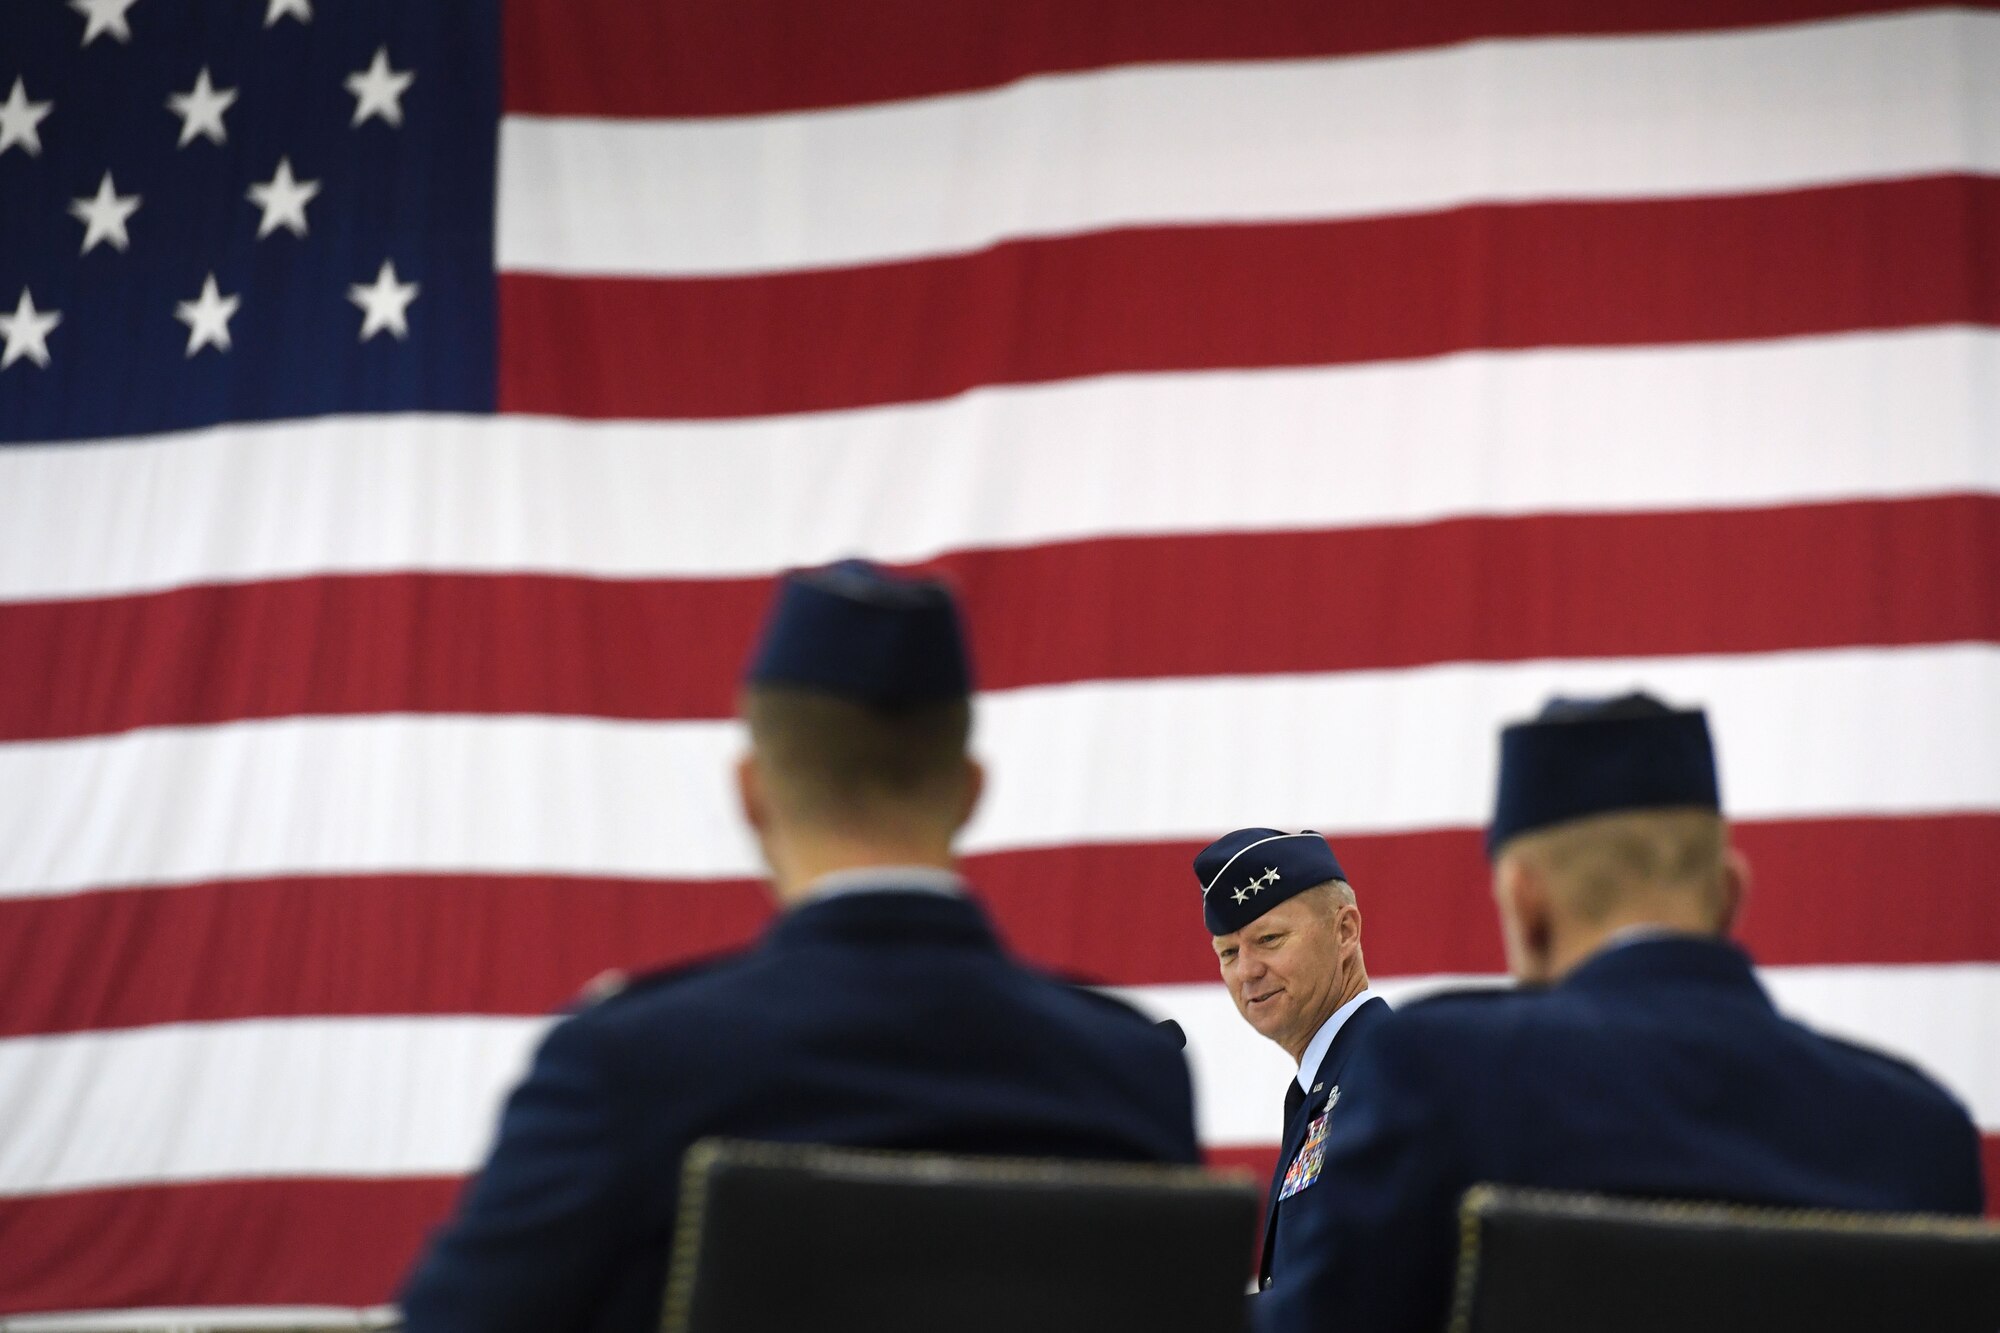 Lt. Gen. Mark Kelly, 12th Air Force commander, presides over the 432nd Wing change of command ceremony July 6, 2017, at Creech Air Force Base, Nev. During the event, the general bid farewell to Col. Case Cunningham while welcoming Col. Julian Cheater. (U.S. Air Force photo/Airman 1st Class James Thompson)